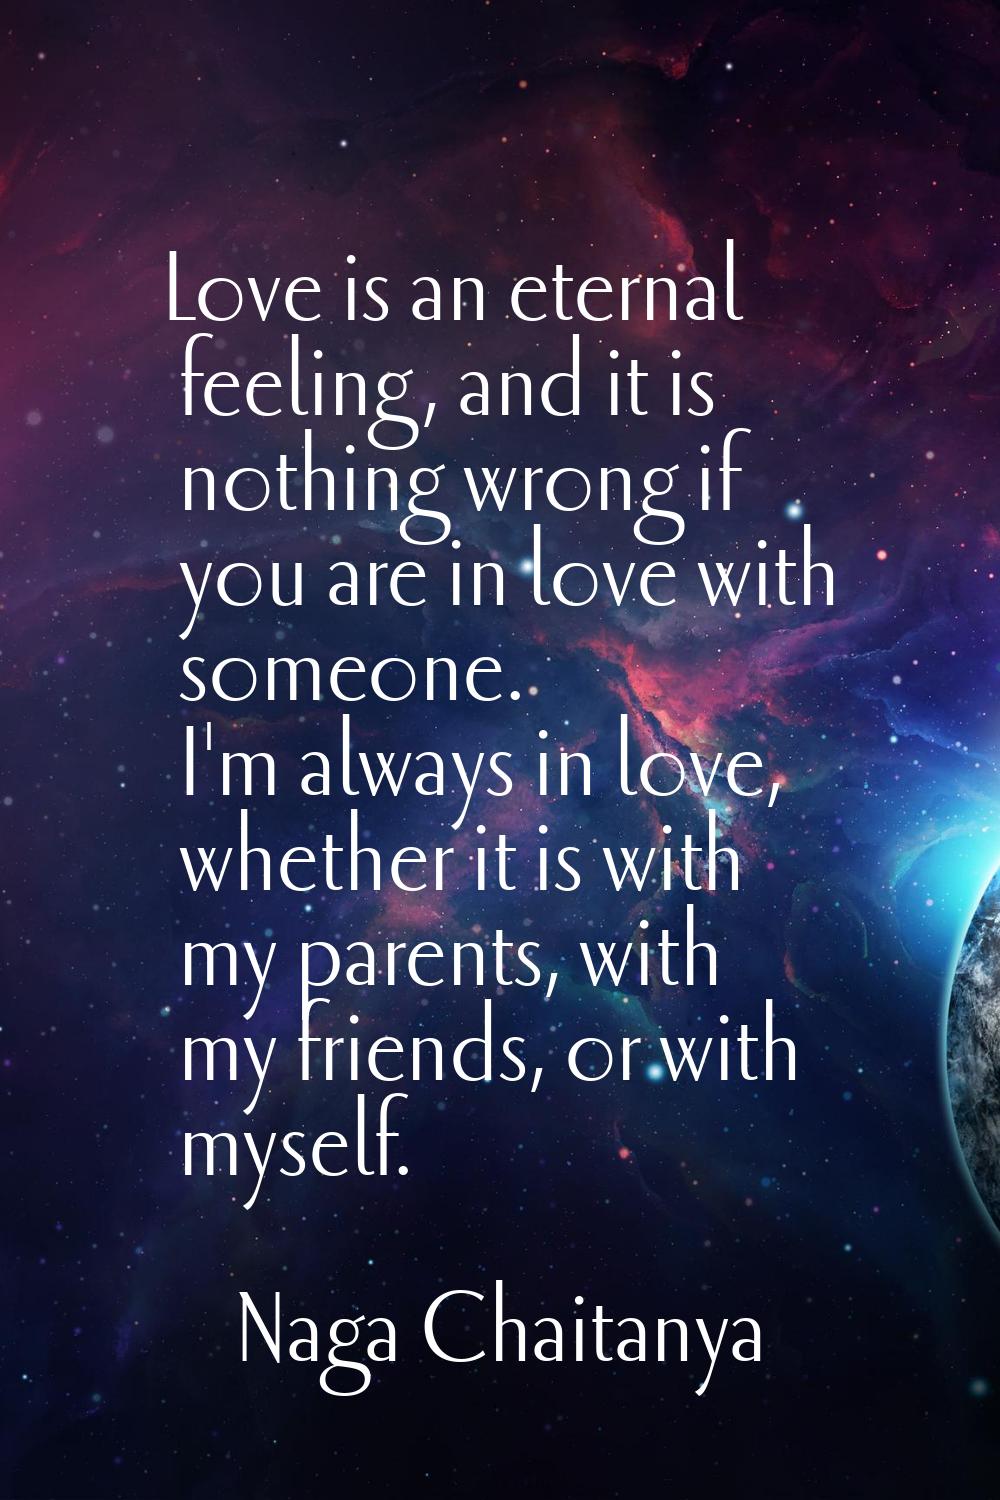 Love is an eternal feeling, and it is nothing wrong if you are in love with someone. I'm always in 